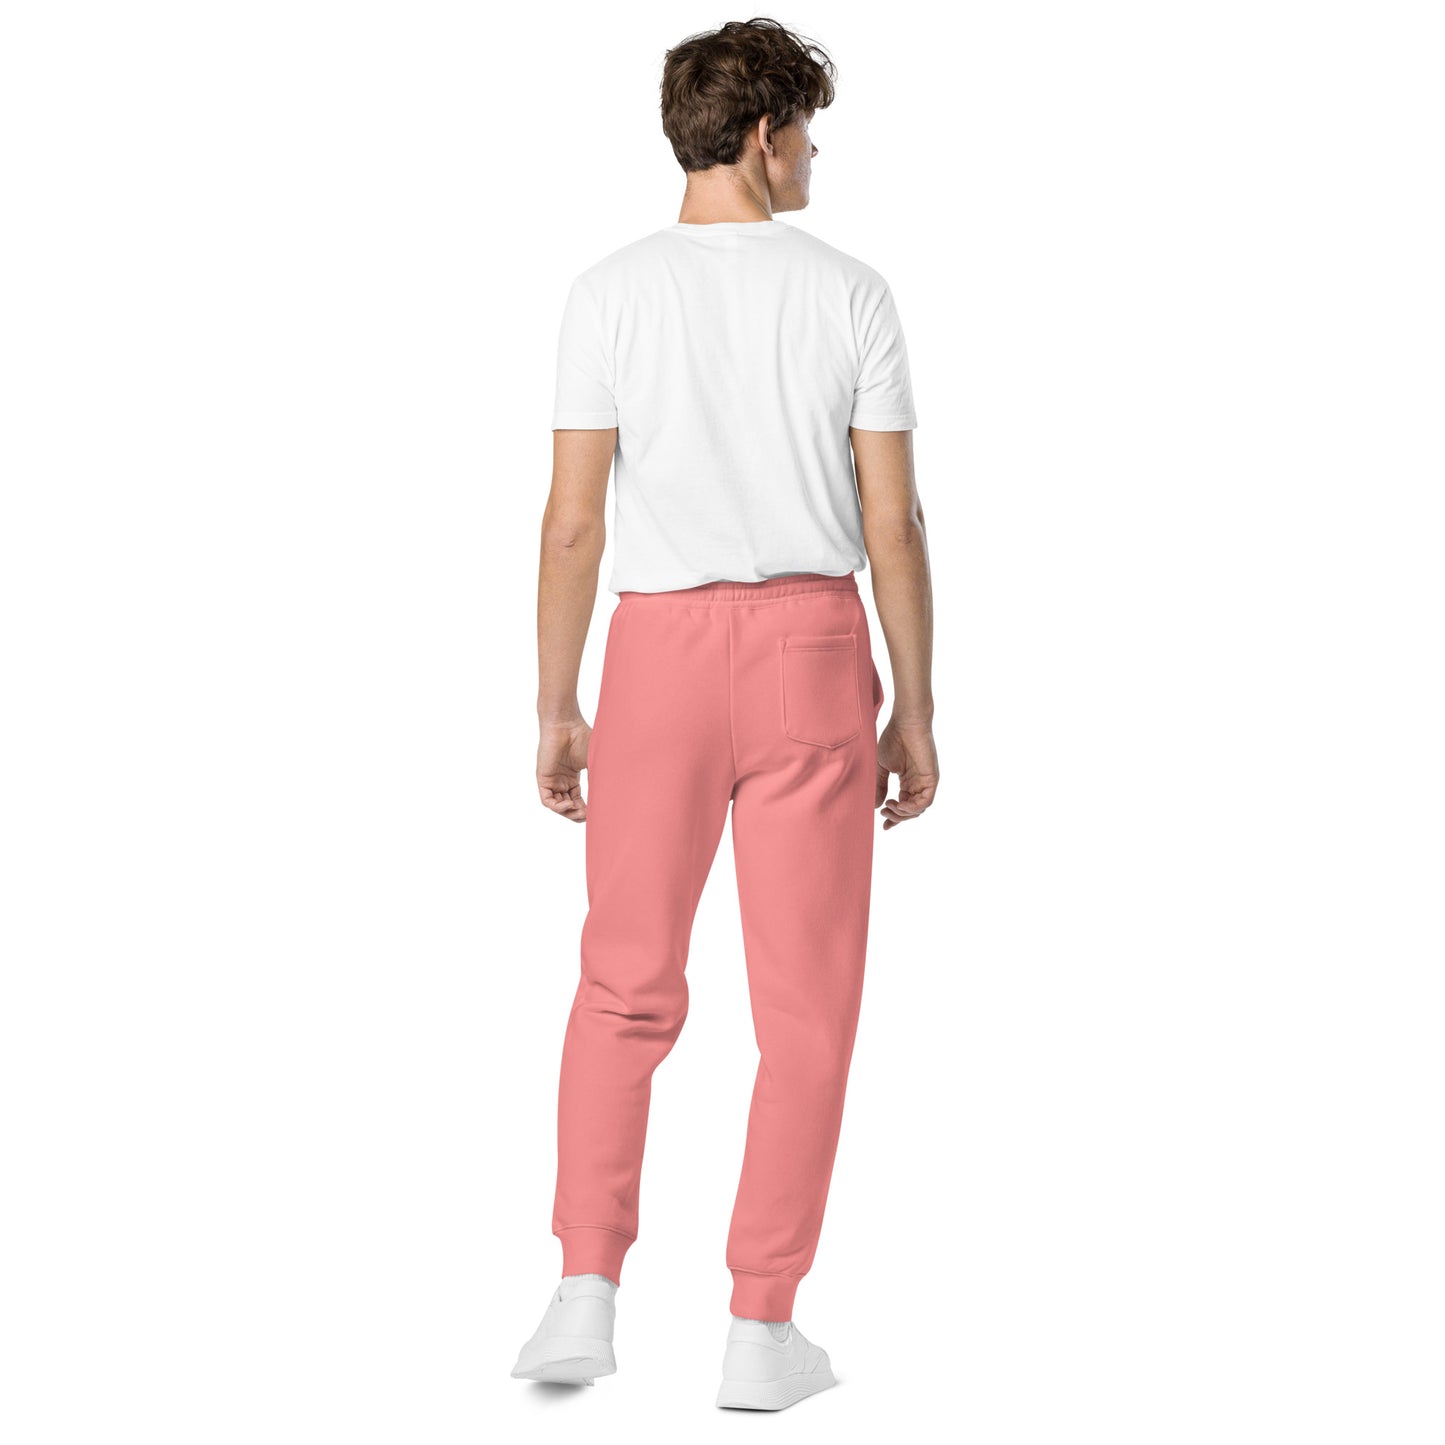 Adonis-Creations - Men's pigment-dyed embroidered sweatpants